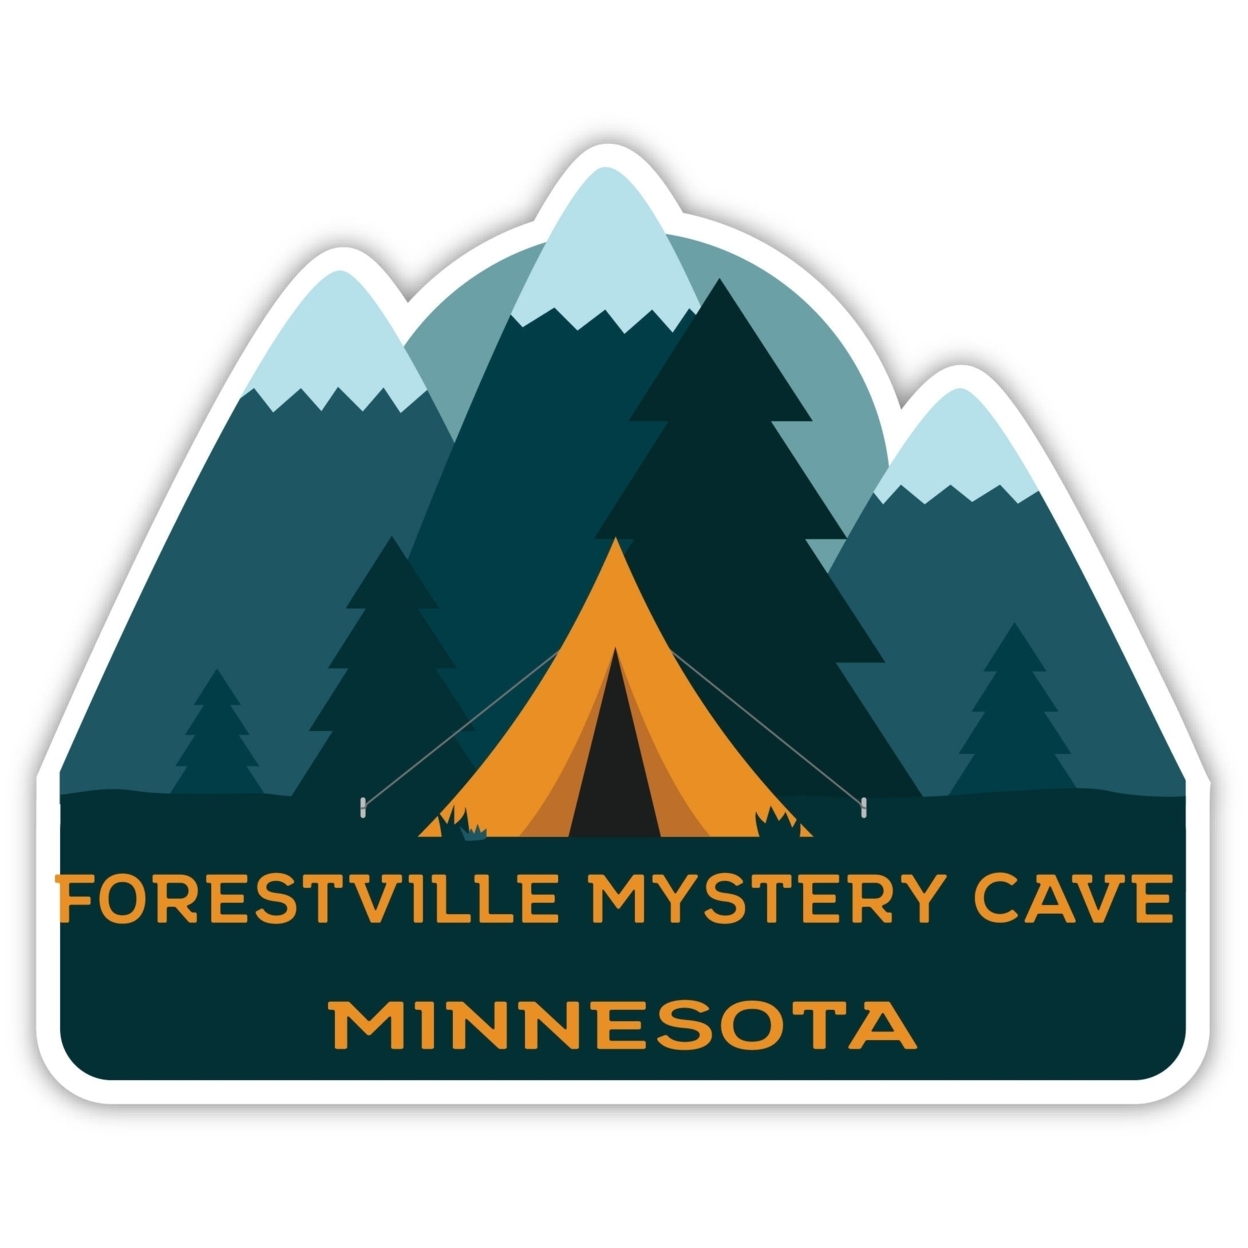 Forestville Mystery Cave Minnesota Souvenir Decorative Stickers (Choose Theme And Size) - 4-Pack, 2-Inch, Tent